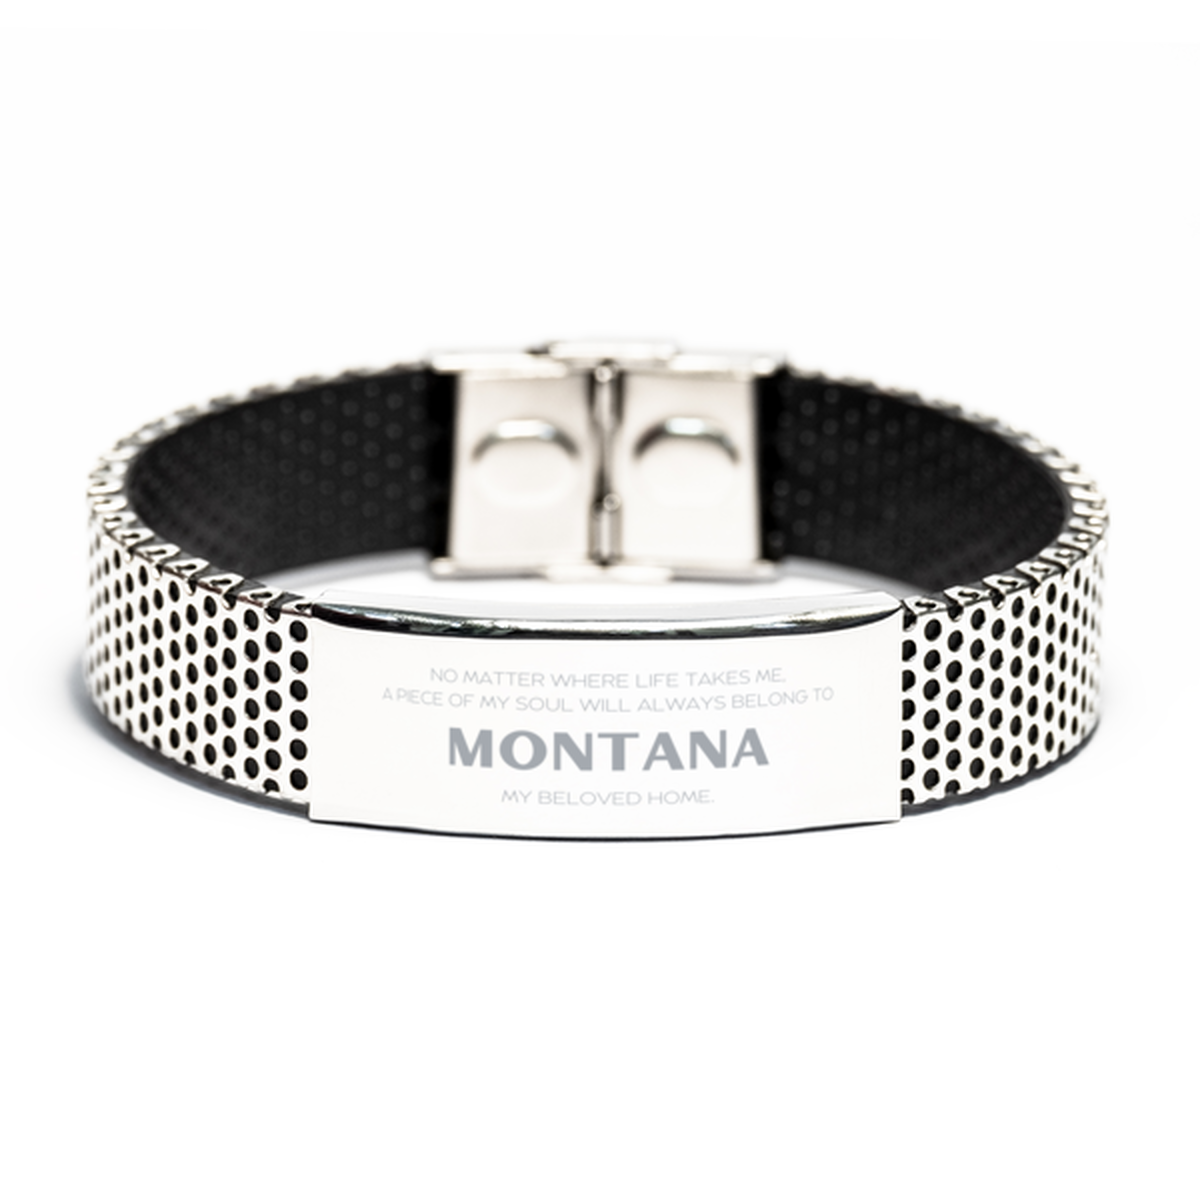 Love Montana State Gifts, My soul will always belong to Montana, Proud Stainless Steel Bracelet, Birthday Unique Gifts For Montana Men, Women, Friends